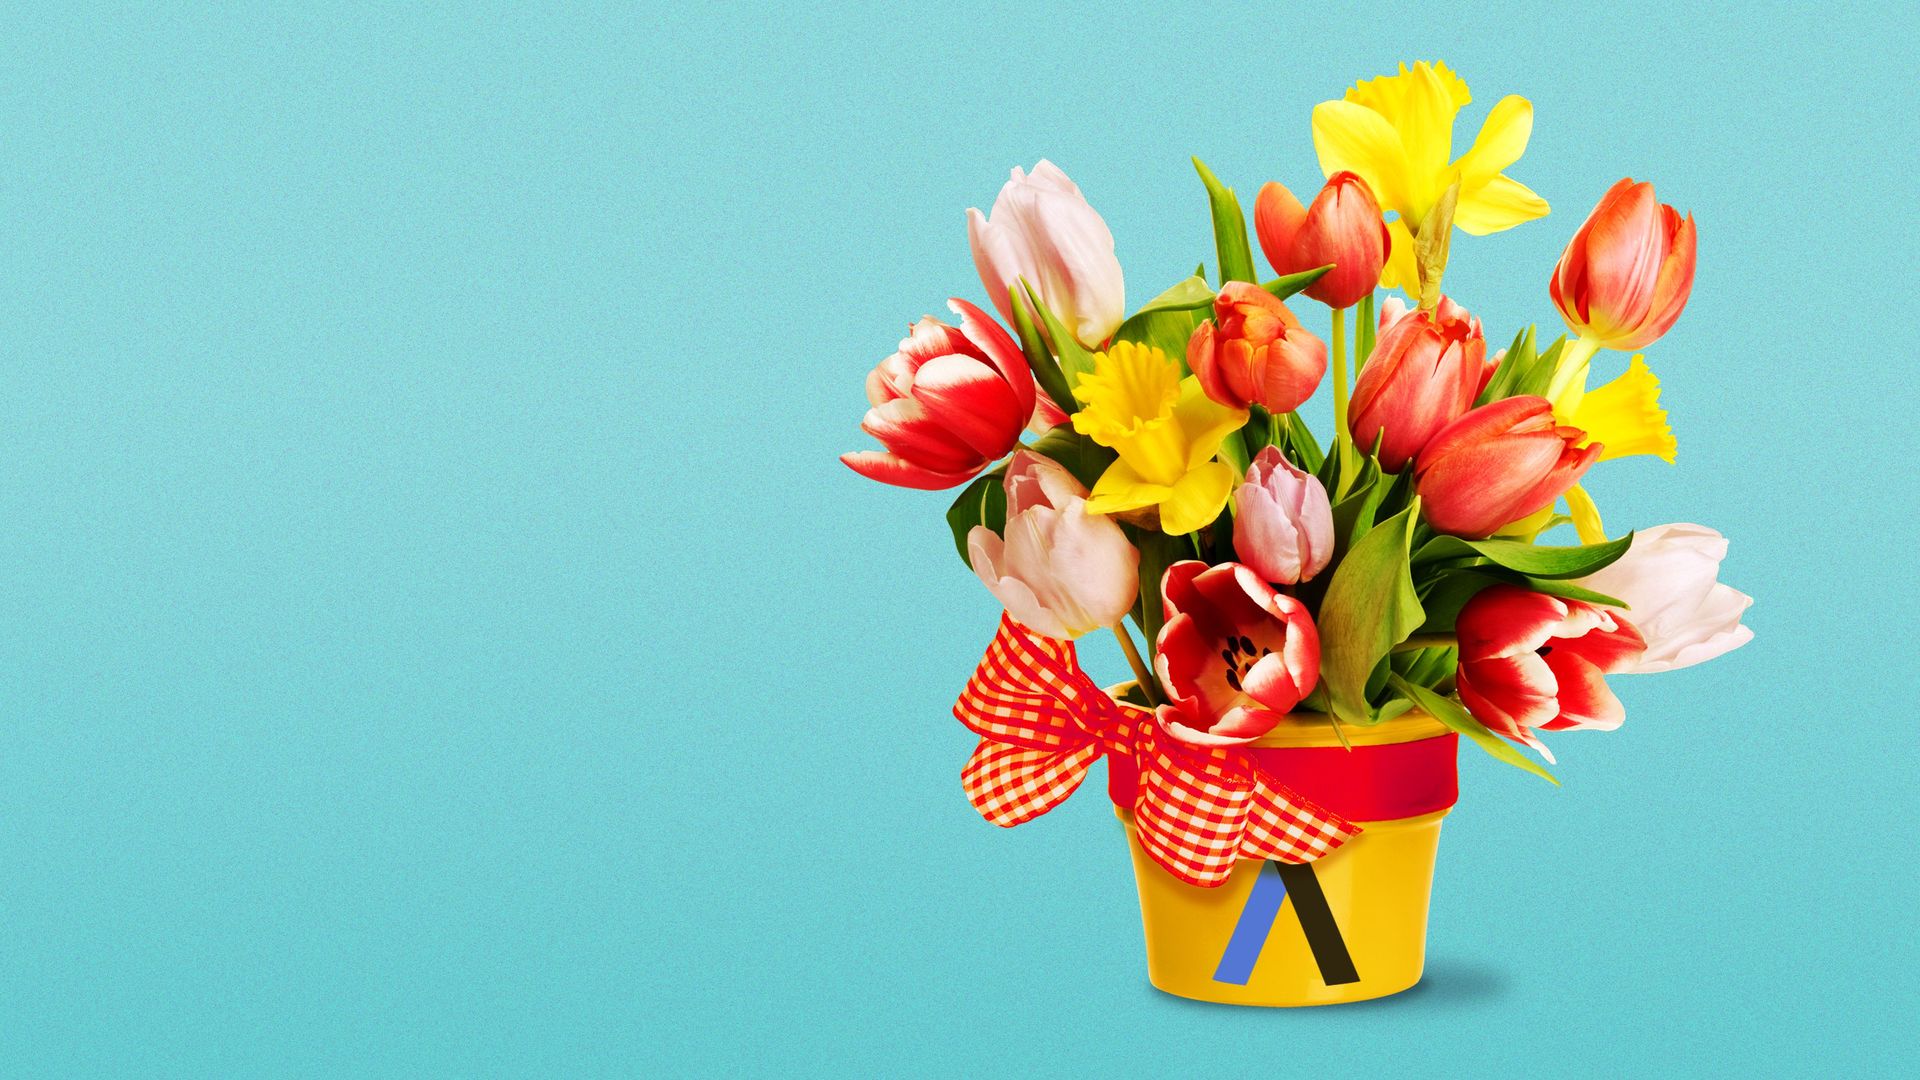 Illustration of a bouquet of tulips with 